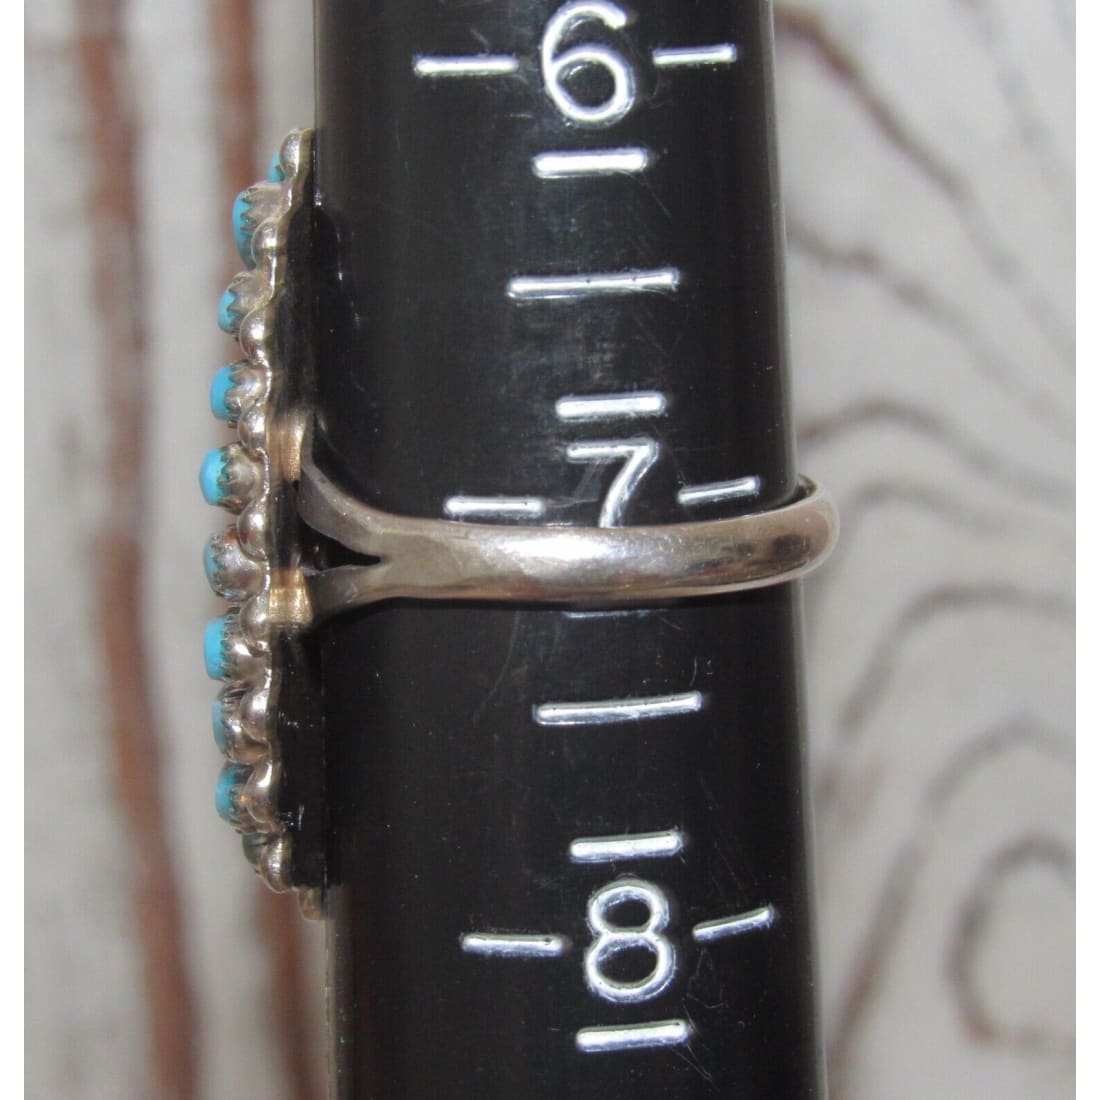 Zuni Turquoise Cluster Ring Sz 7 Sterling Silver Native 